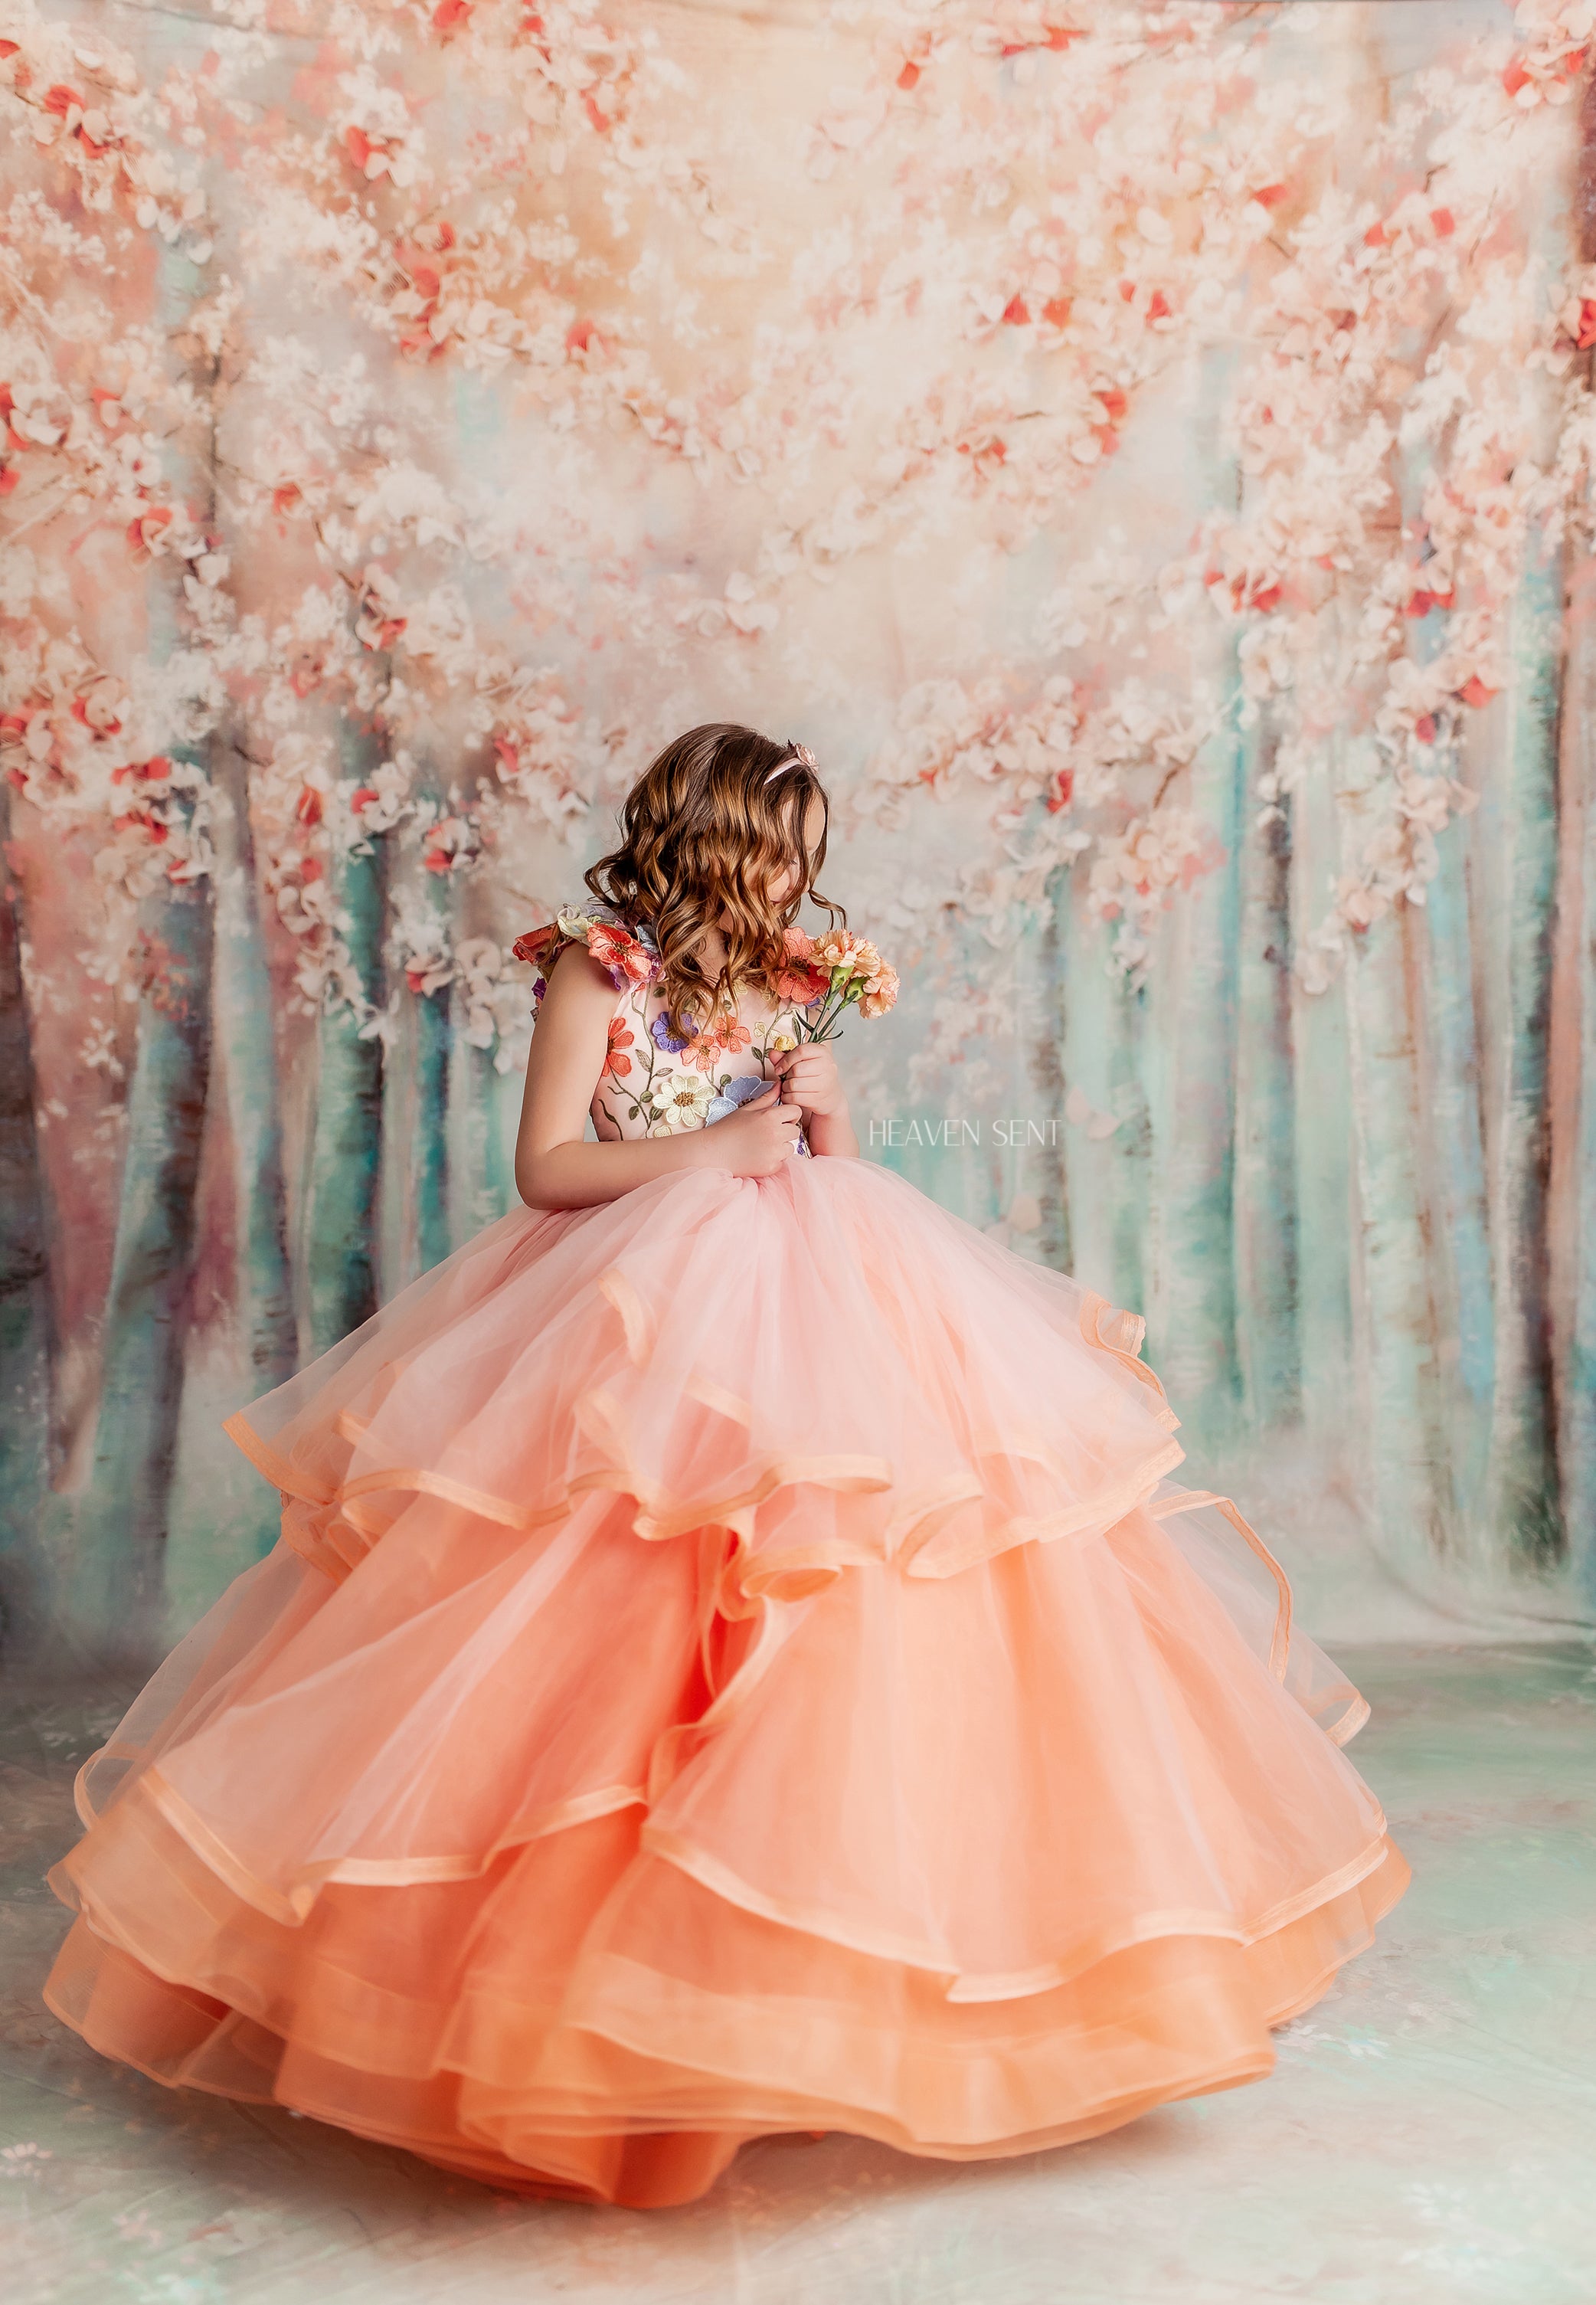 GOWNS FOR PHOTOGRAPHY AND EVENTS. rental dresses for photography sessions:  